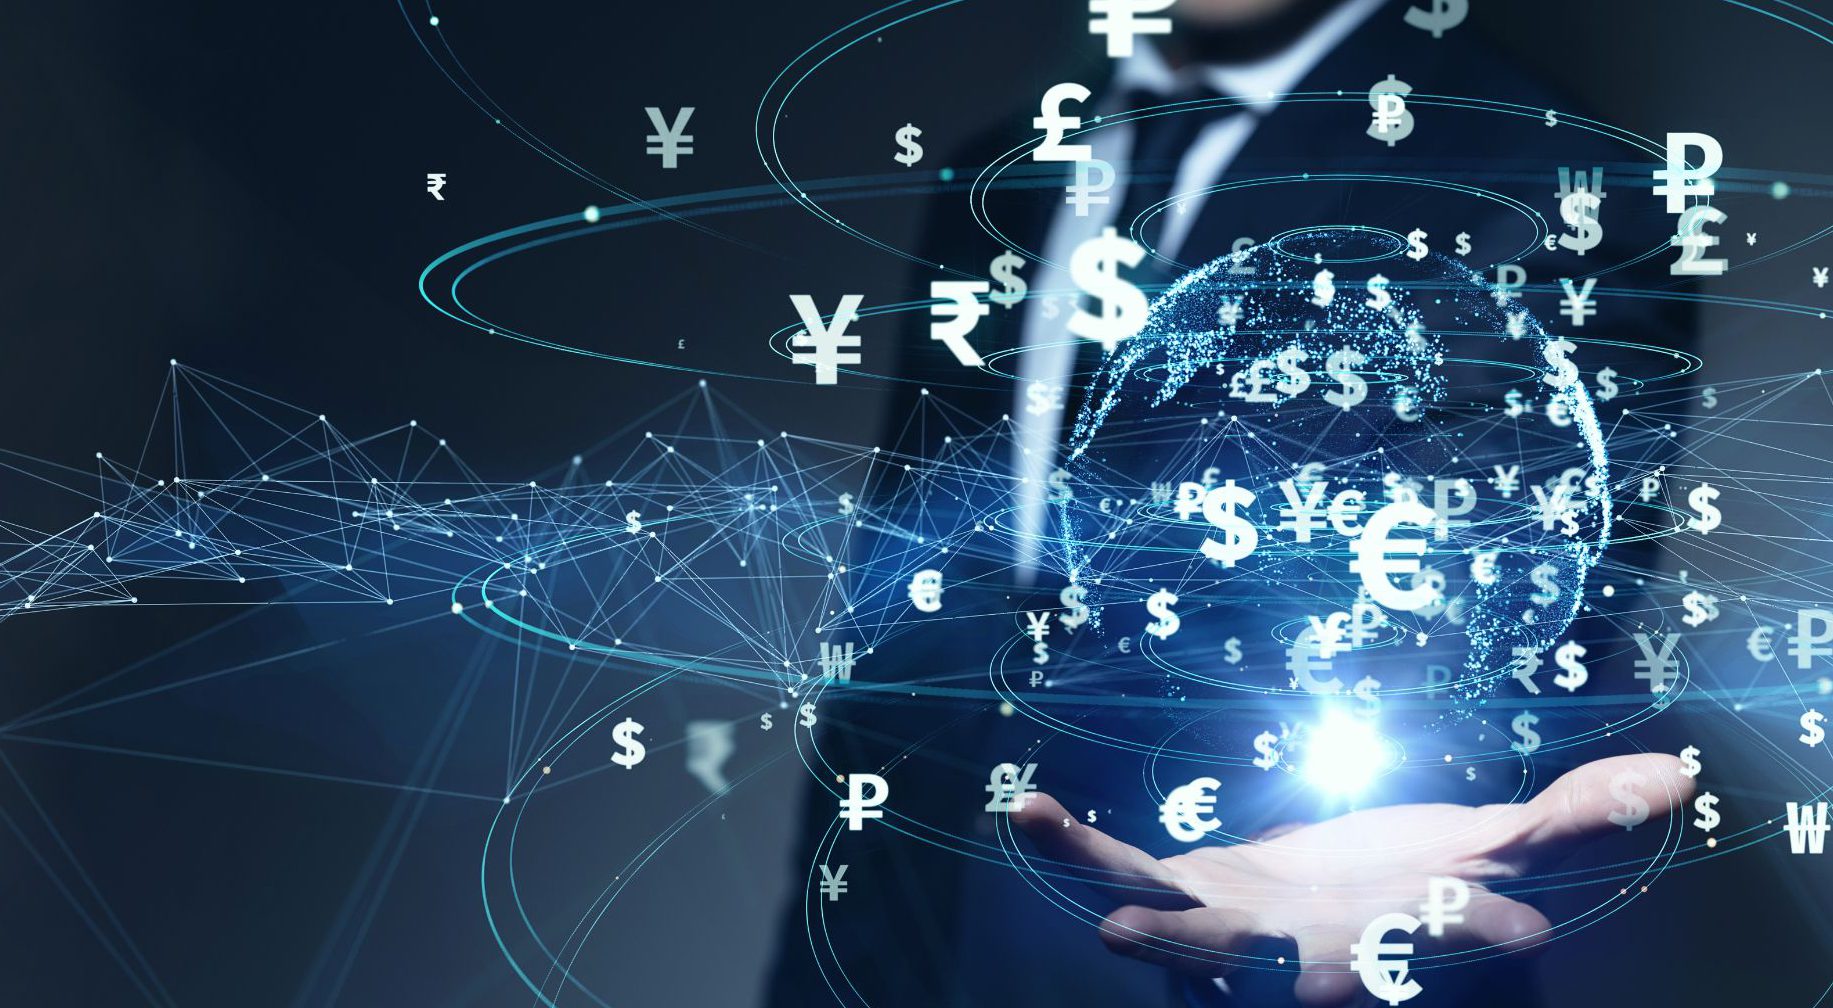 Take Up Global AI In Fintech Market Opportunities With Clear Industry Data – Includes AI In Fintech Market Share